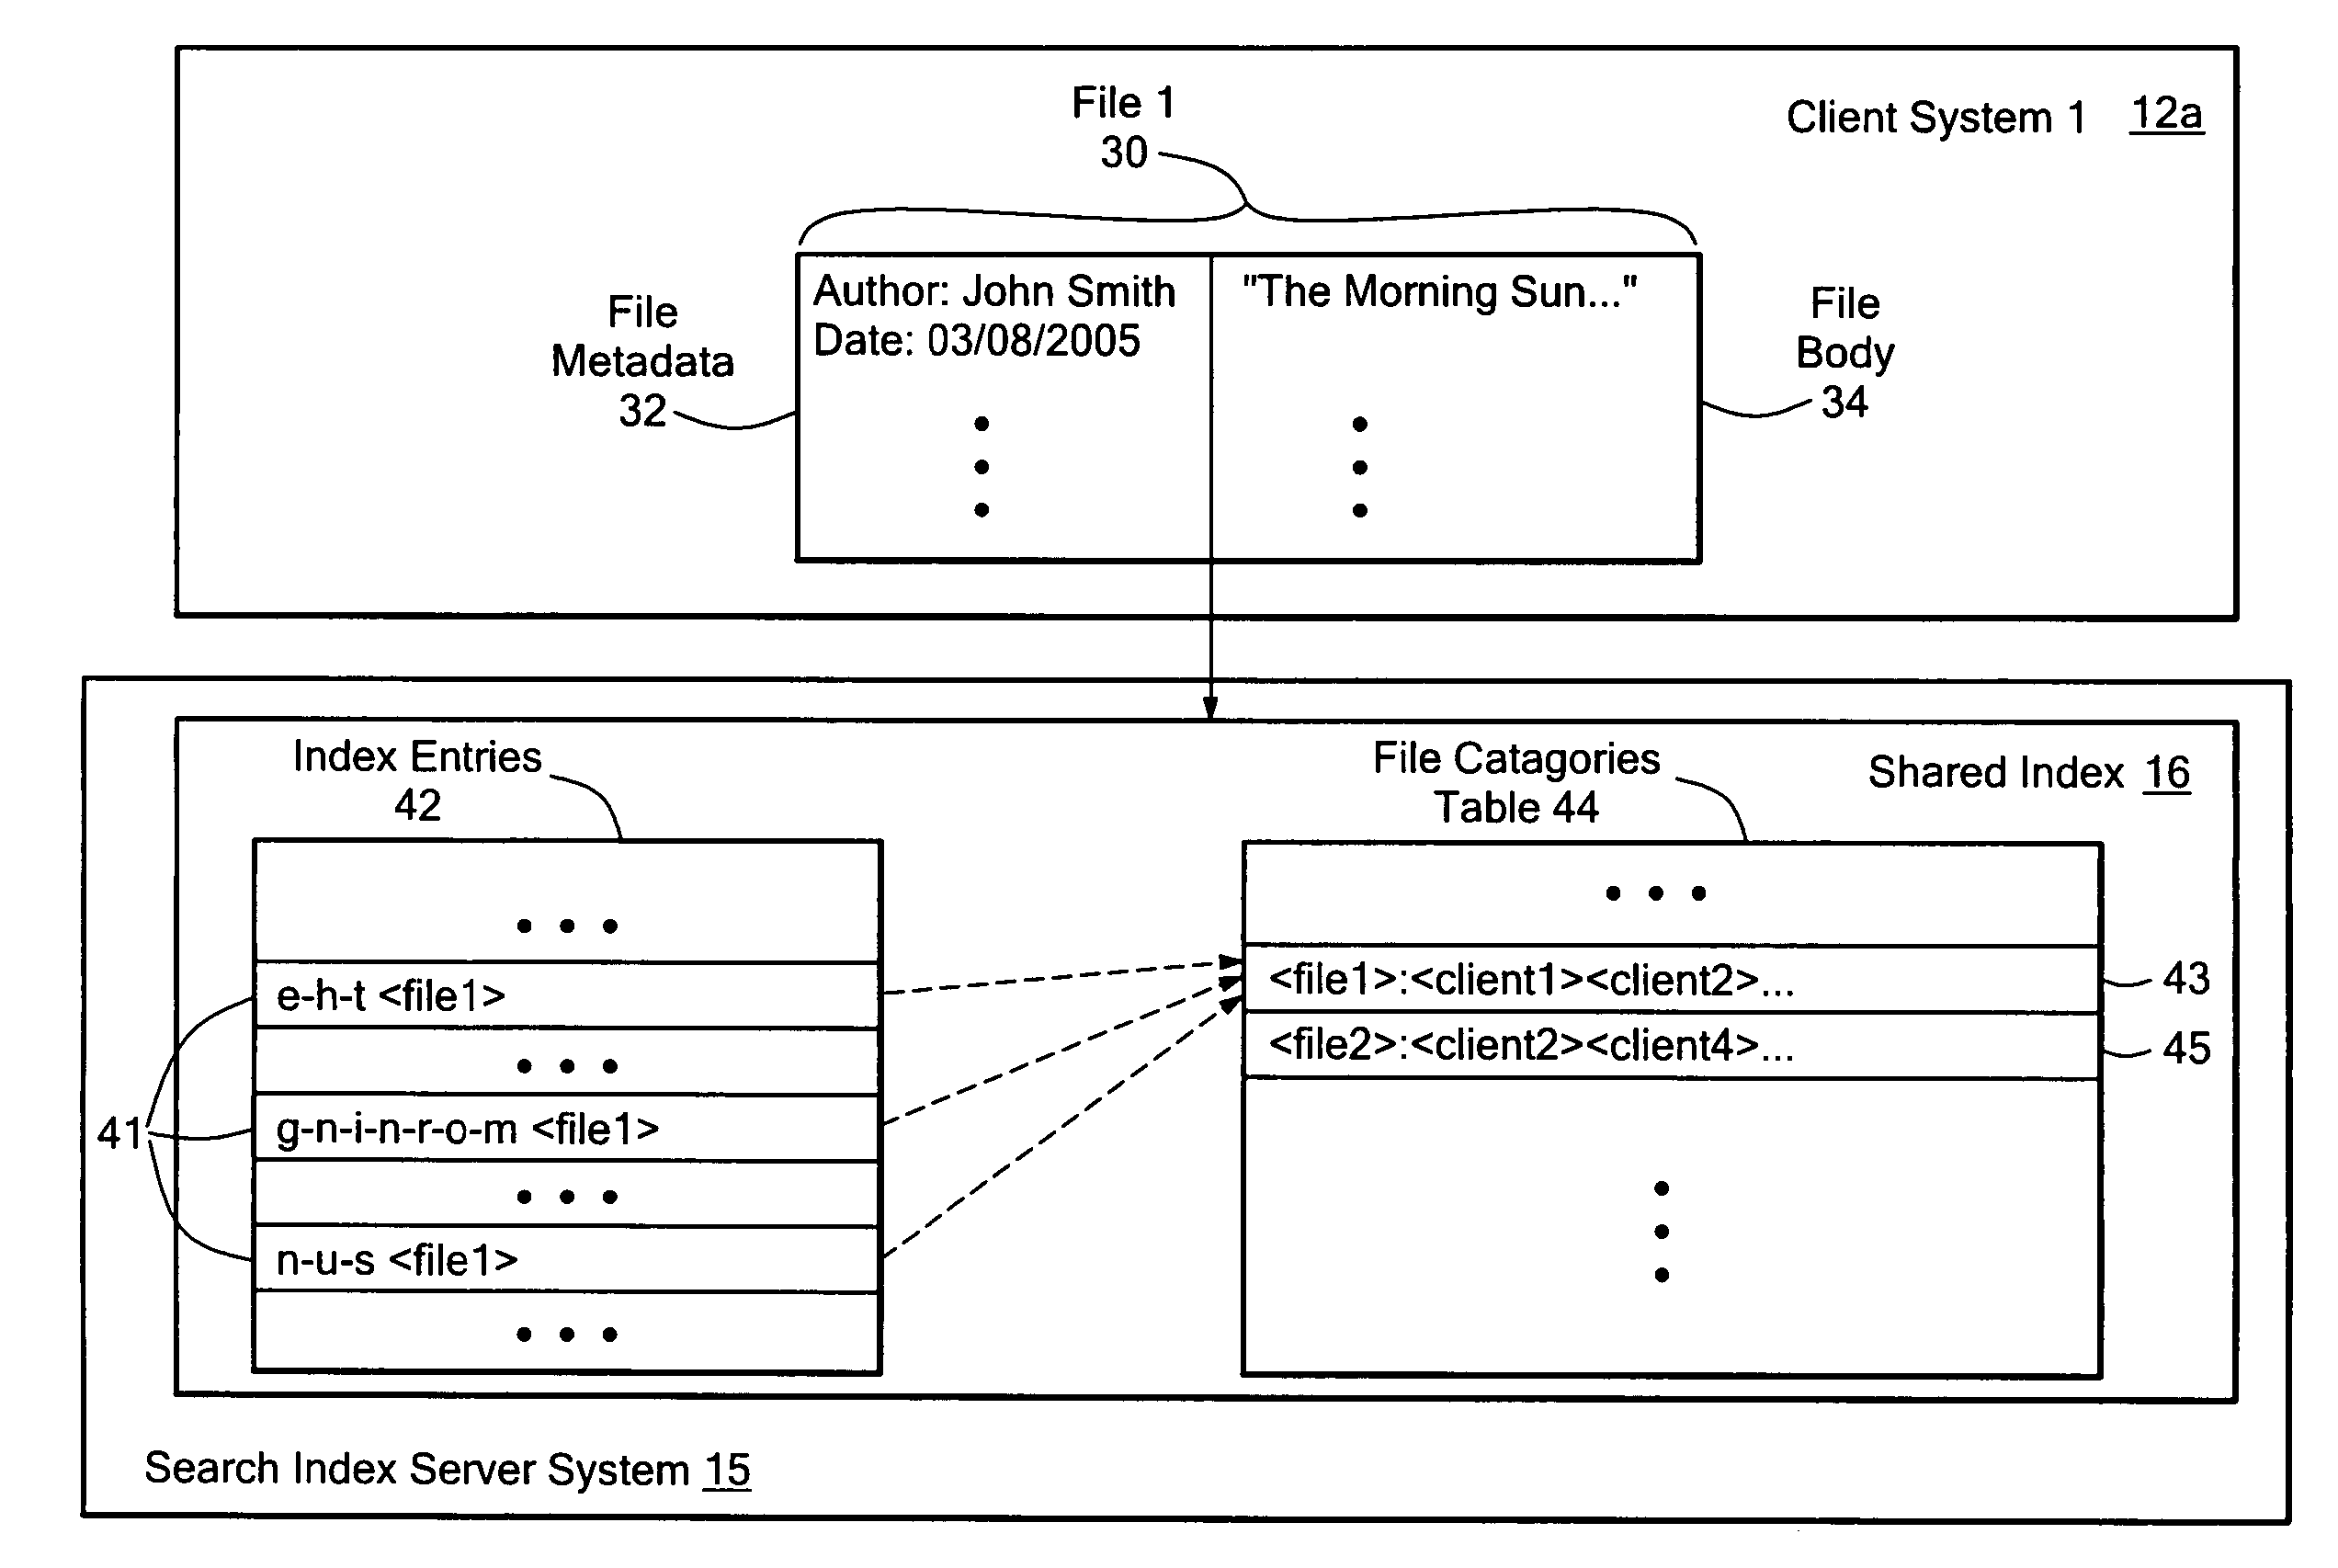 Method and system for providing a shared search index in a peer to peer network